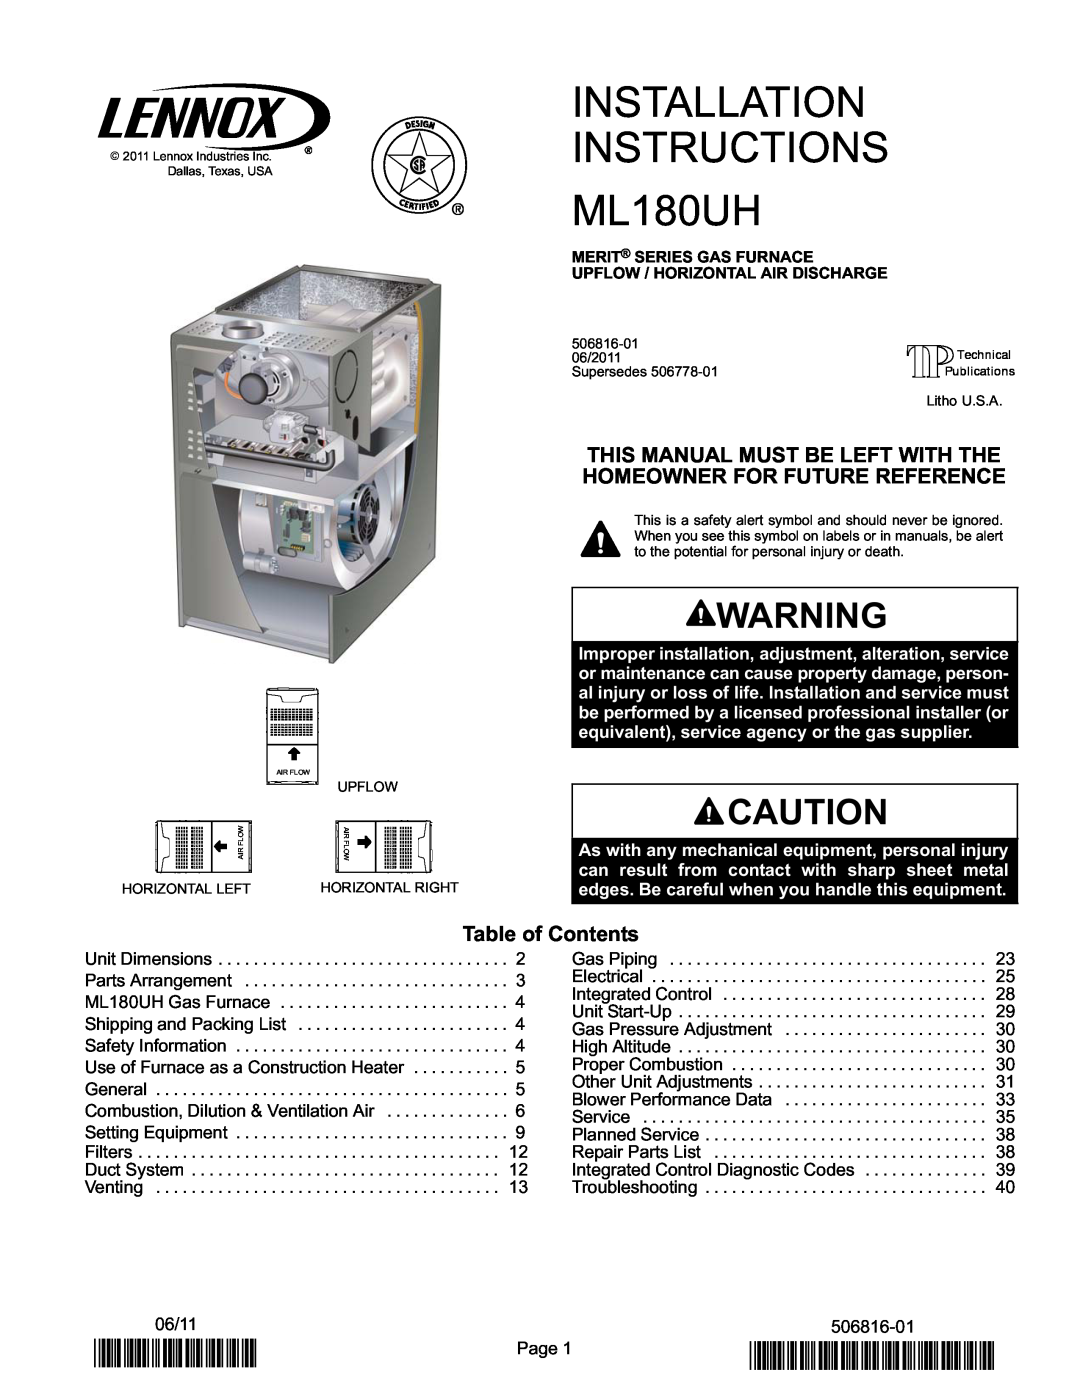 Lennox International Inc Merit Series Gas Furnace installation instructions Table of Contents, 2P0611, P506816-01 